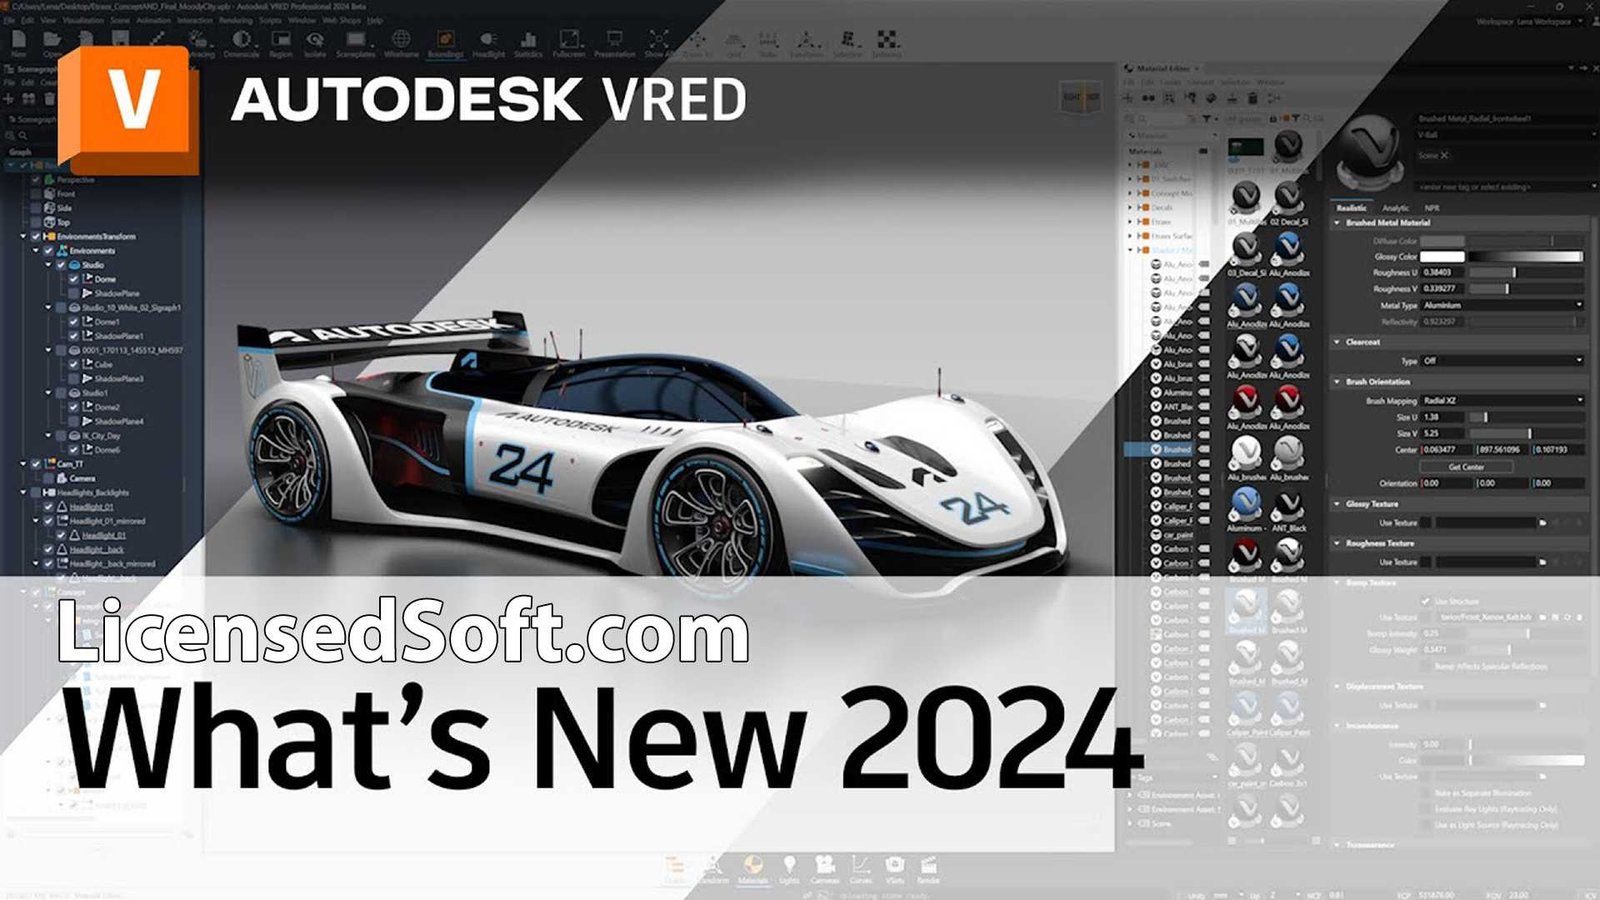 Autodesk VRED Professional 2024 Cover Image By LicensedSoft